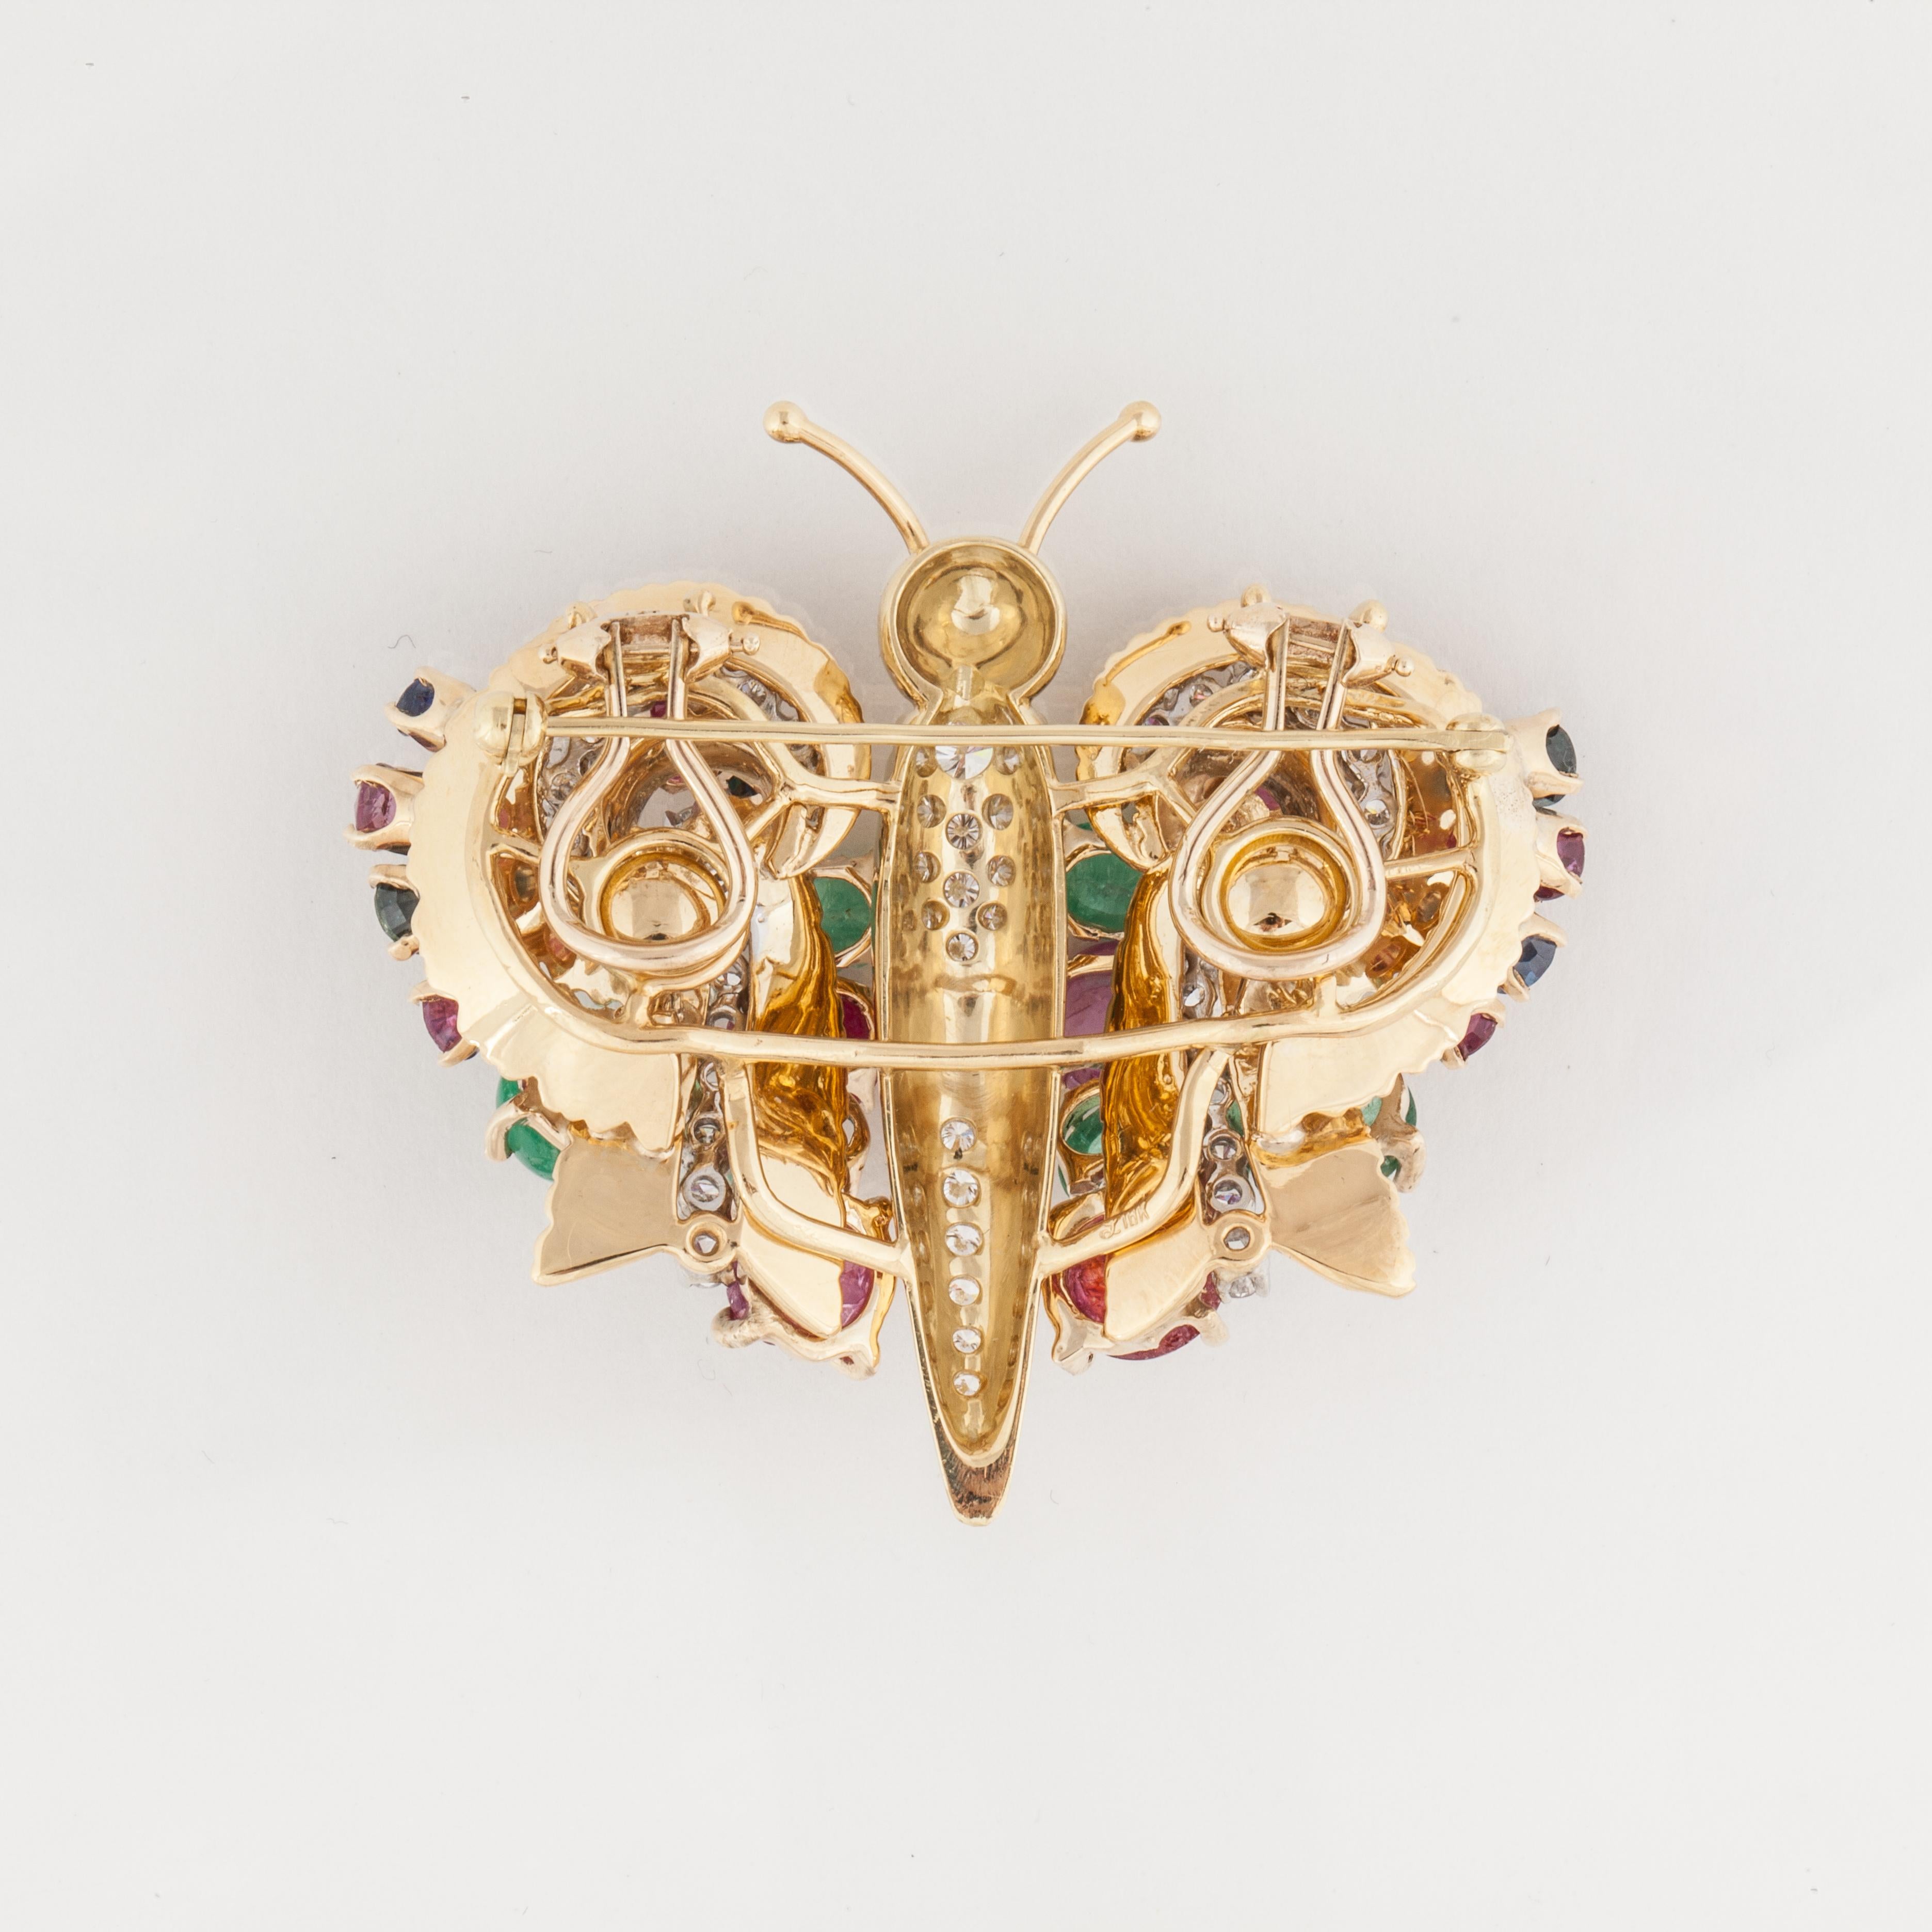 18K yellow gold butterfly convertible brooch/earrings featuring sapphires, emeralds, rubies and diamonds.  The wings are detachable to become a pair of earrings.  There are 54 round diamonds that total 2.15 carats; G-H color and VVS2-VS clarity.  In